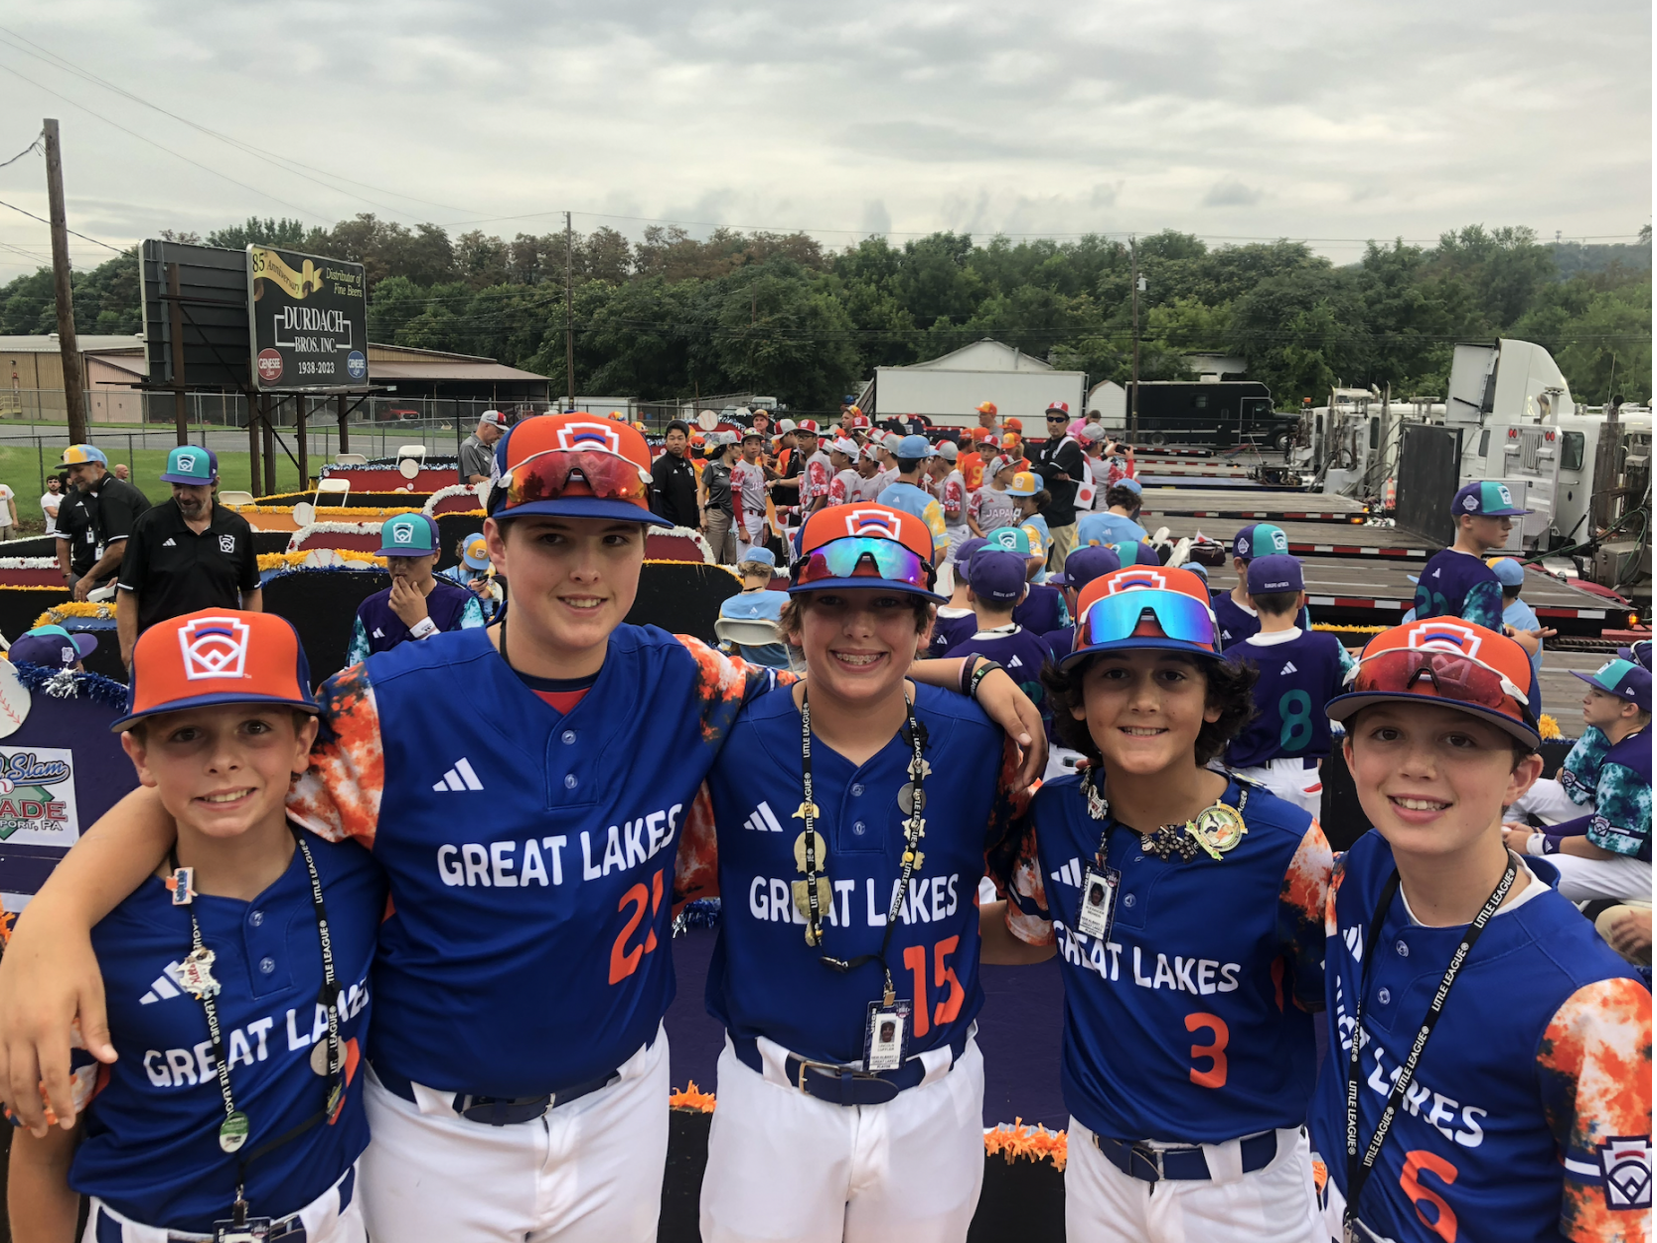 New Albany loses 4-3 in rain-shortened game at Little League World